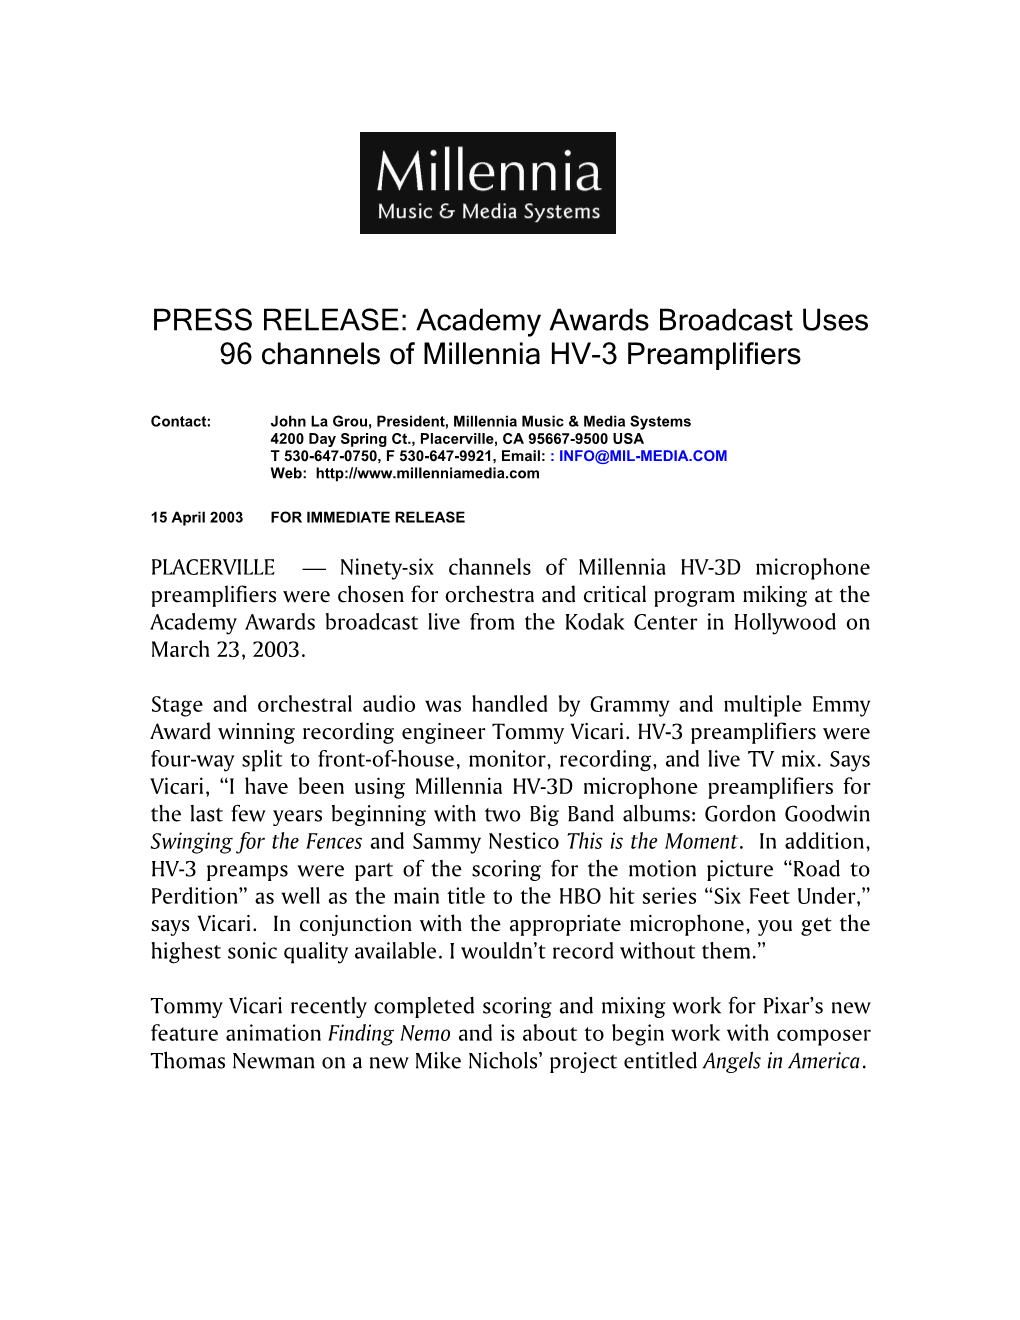 Academy Awards Broadcast Uses 96 Channels of Millennia HV-3 Preamplifiers